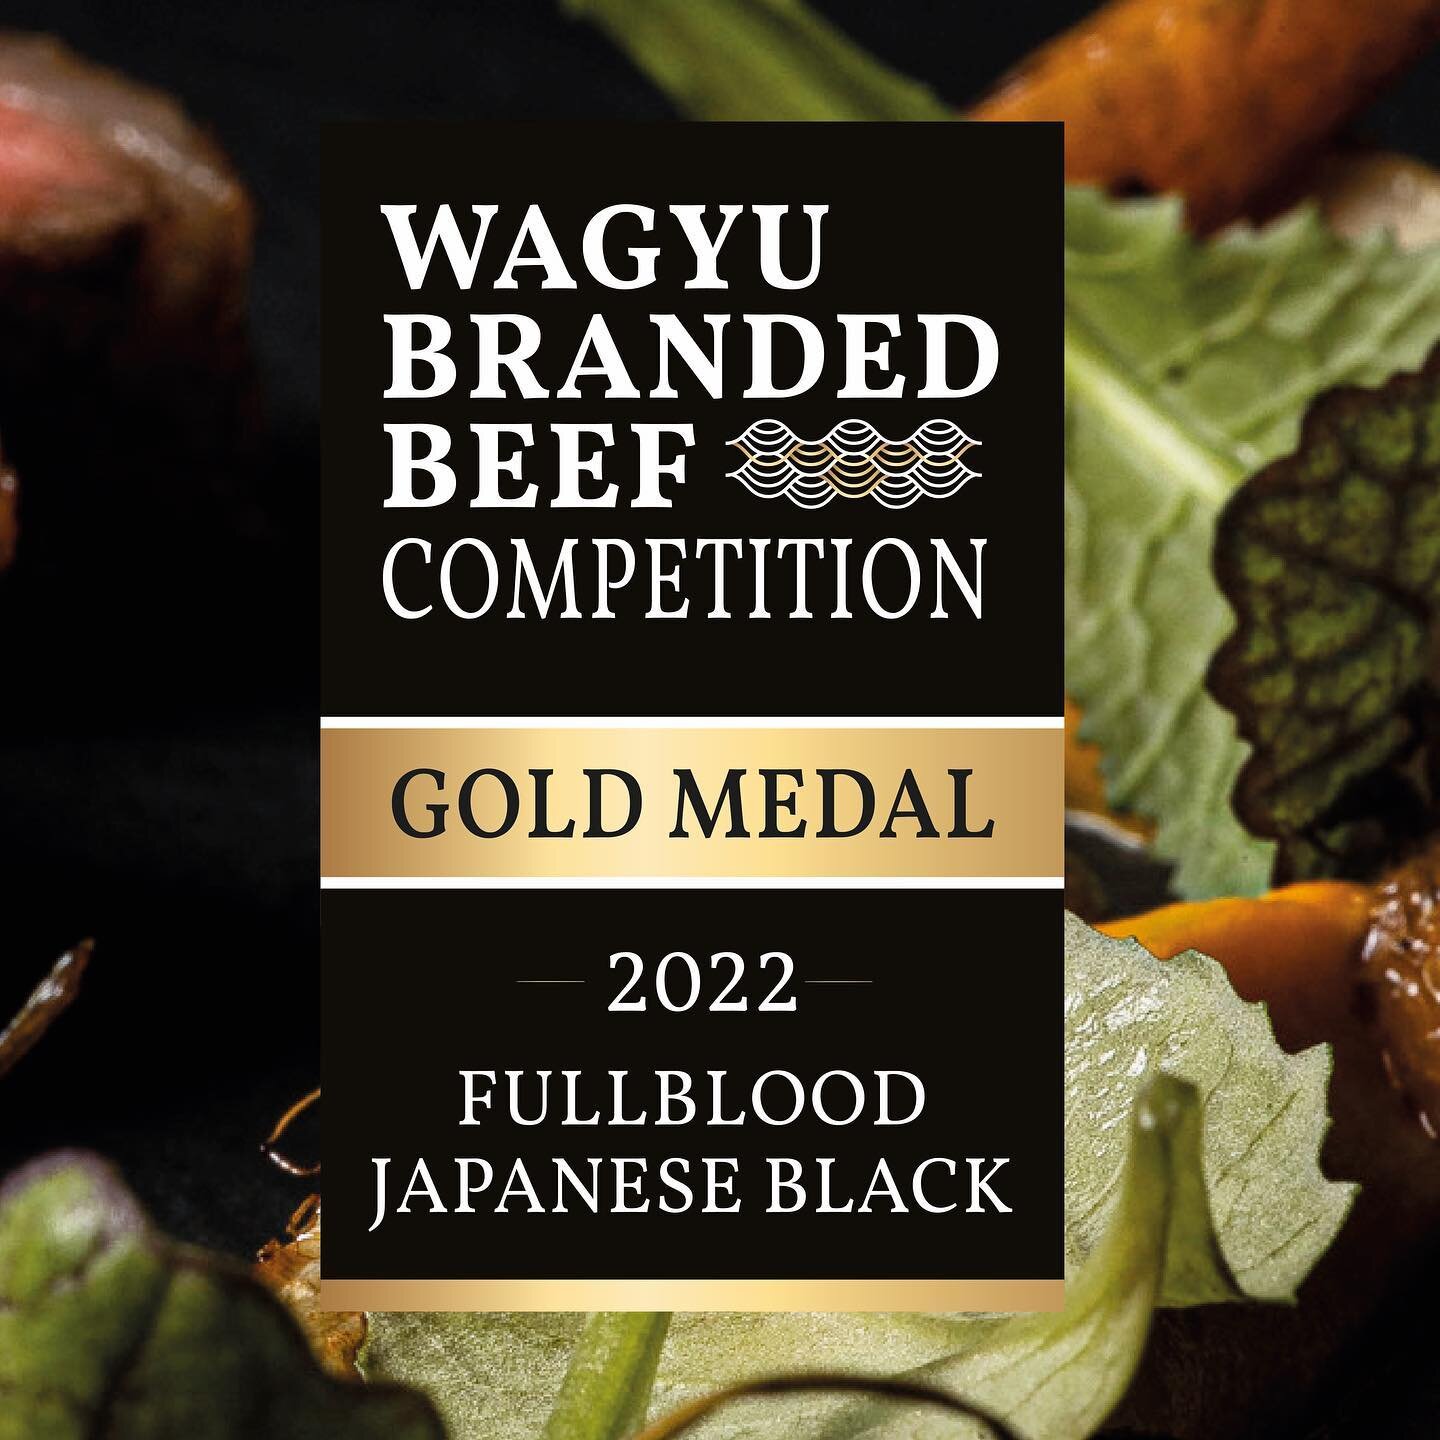 HONOURED | We are honoured to take home gold at the 2022 Wagyu Branded Beef Competition hosted by the Australian Wagyu Association.